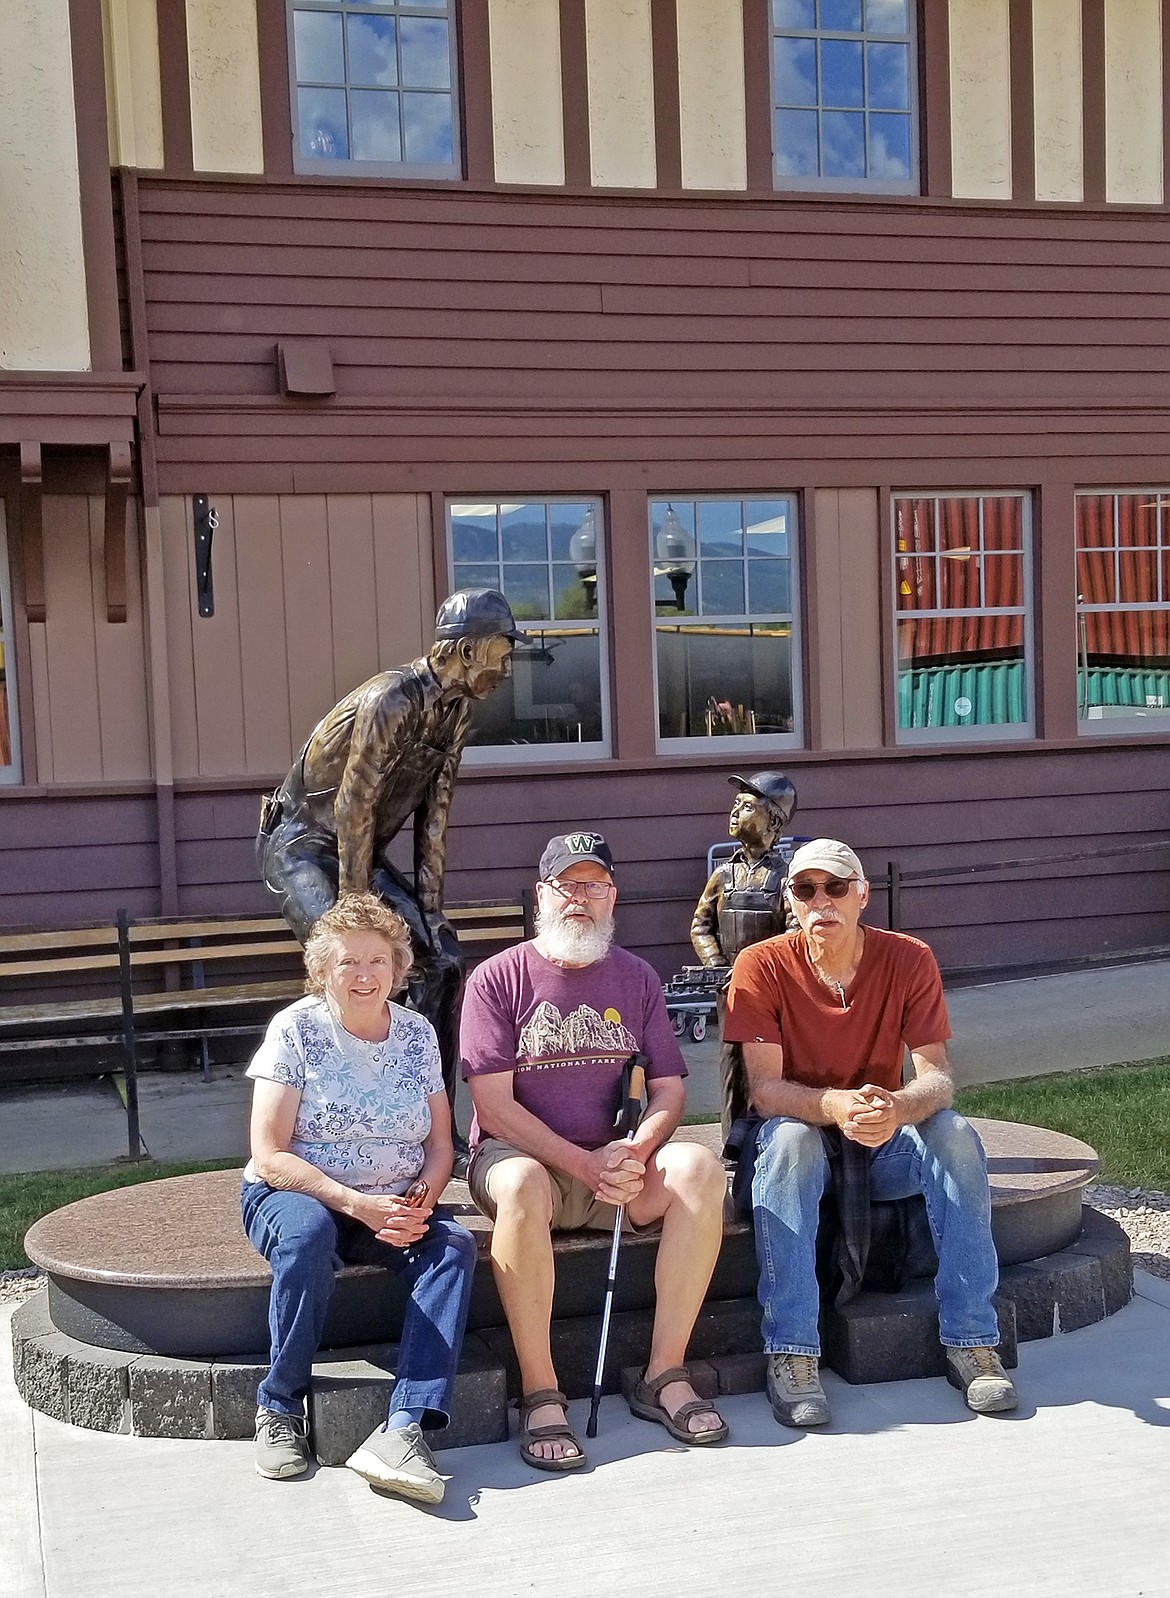 Executive Director of the Stumptown Historical Society, Jill Evans with Karl Schenk, President of the Board of the Historical Society and Alex Hassan, owner of the statue, sit with the newly placed bronze that honors railroaders. (Photo provided)